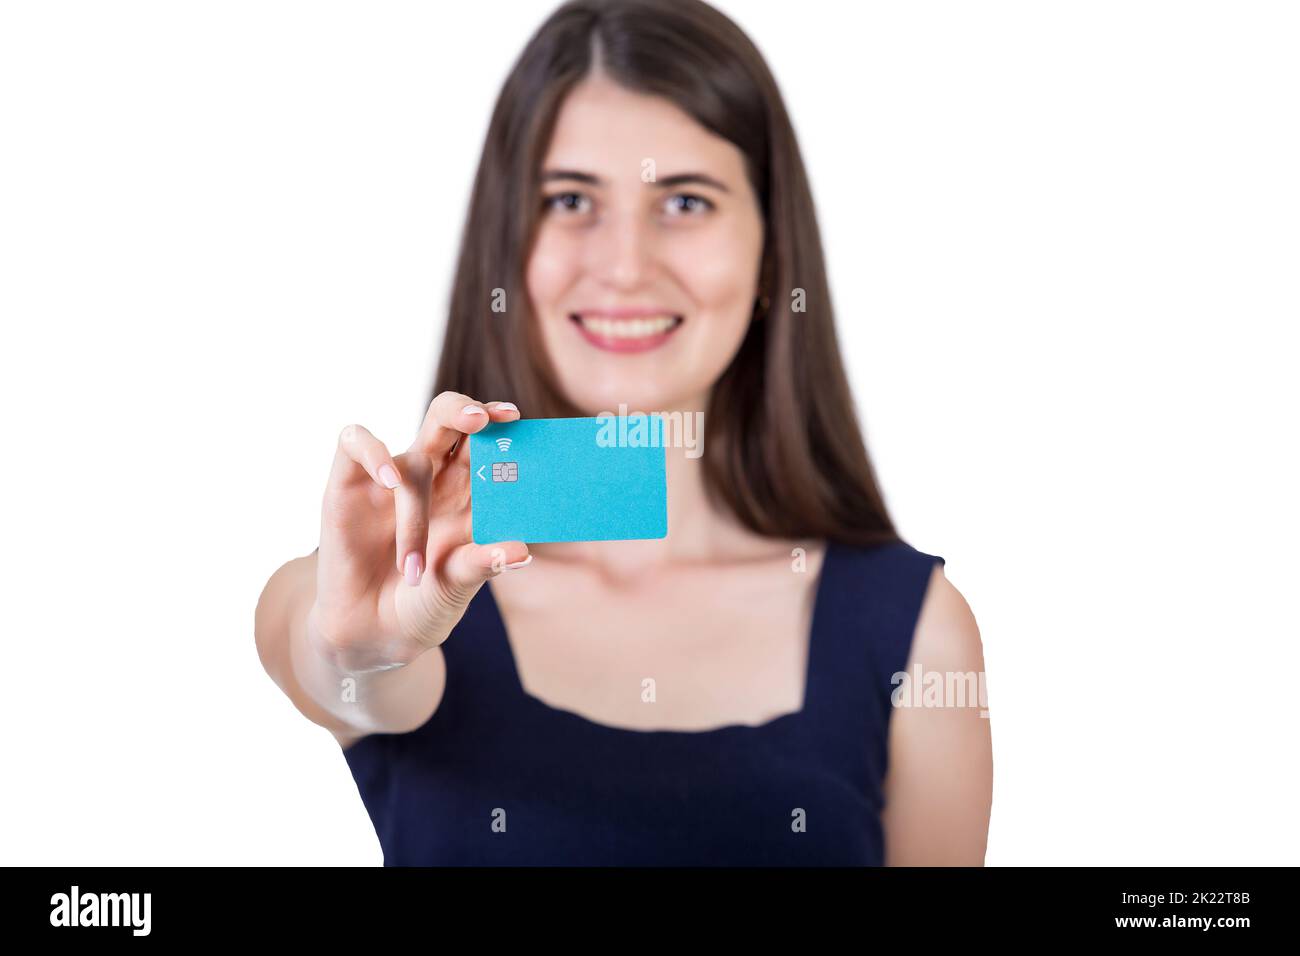 Happy young woman holding to camera a credit card. Close up portrait of a girl advertising a bank isolated on white background with copy space Stock Photo